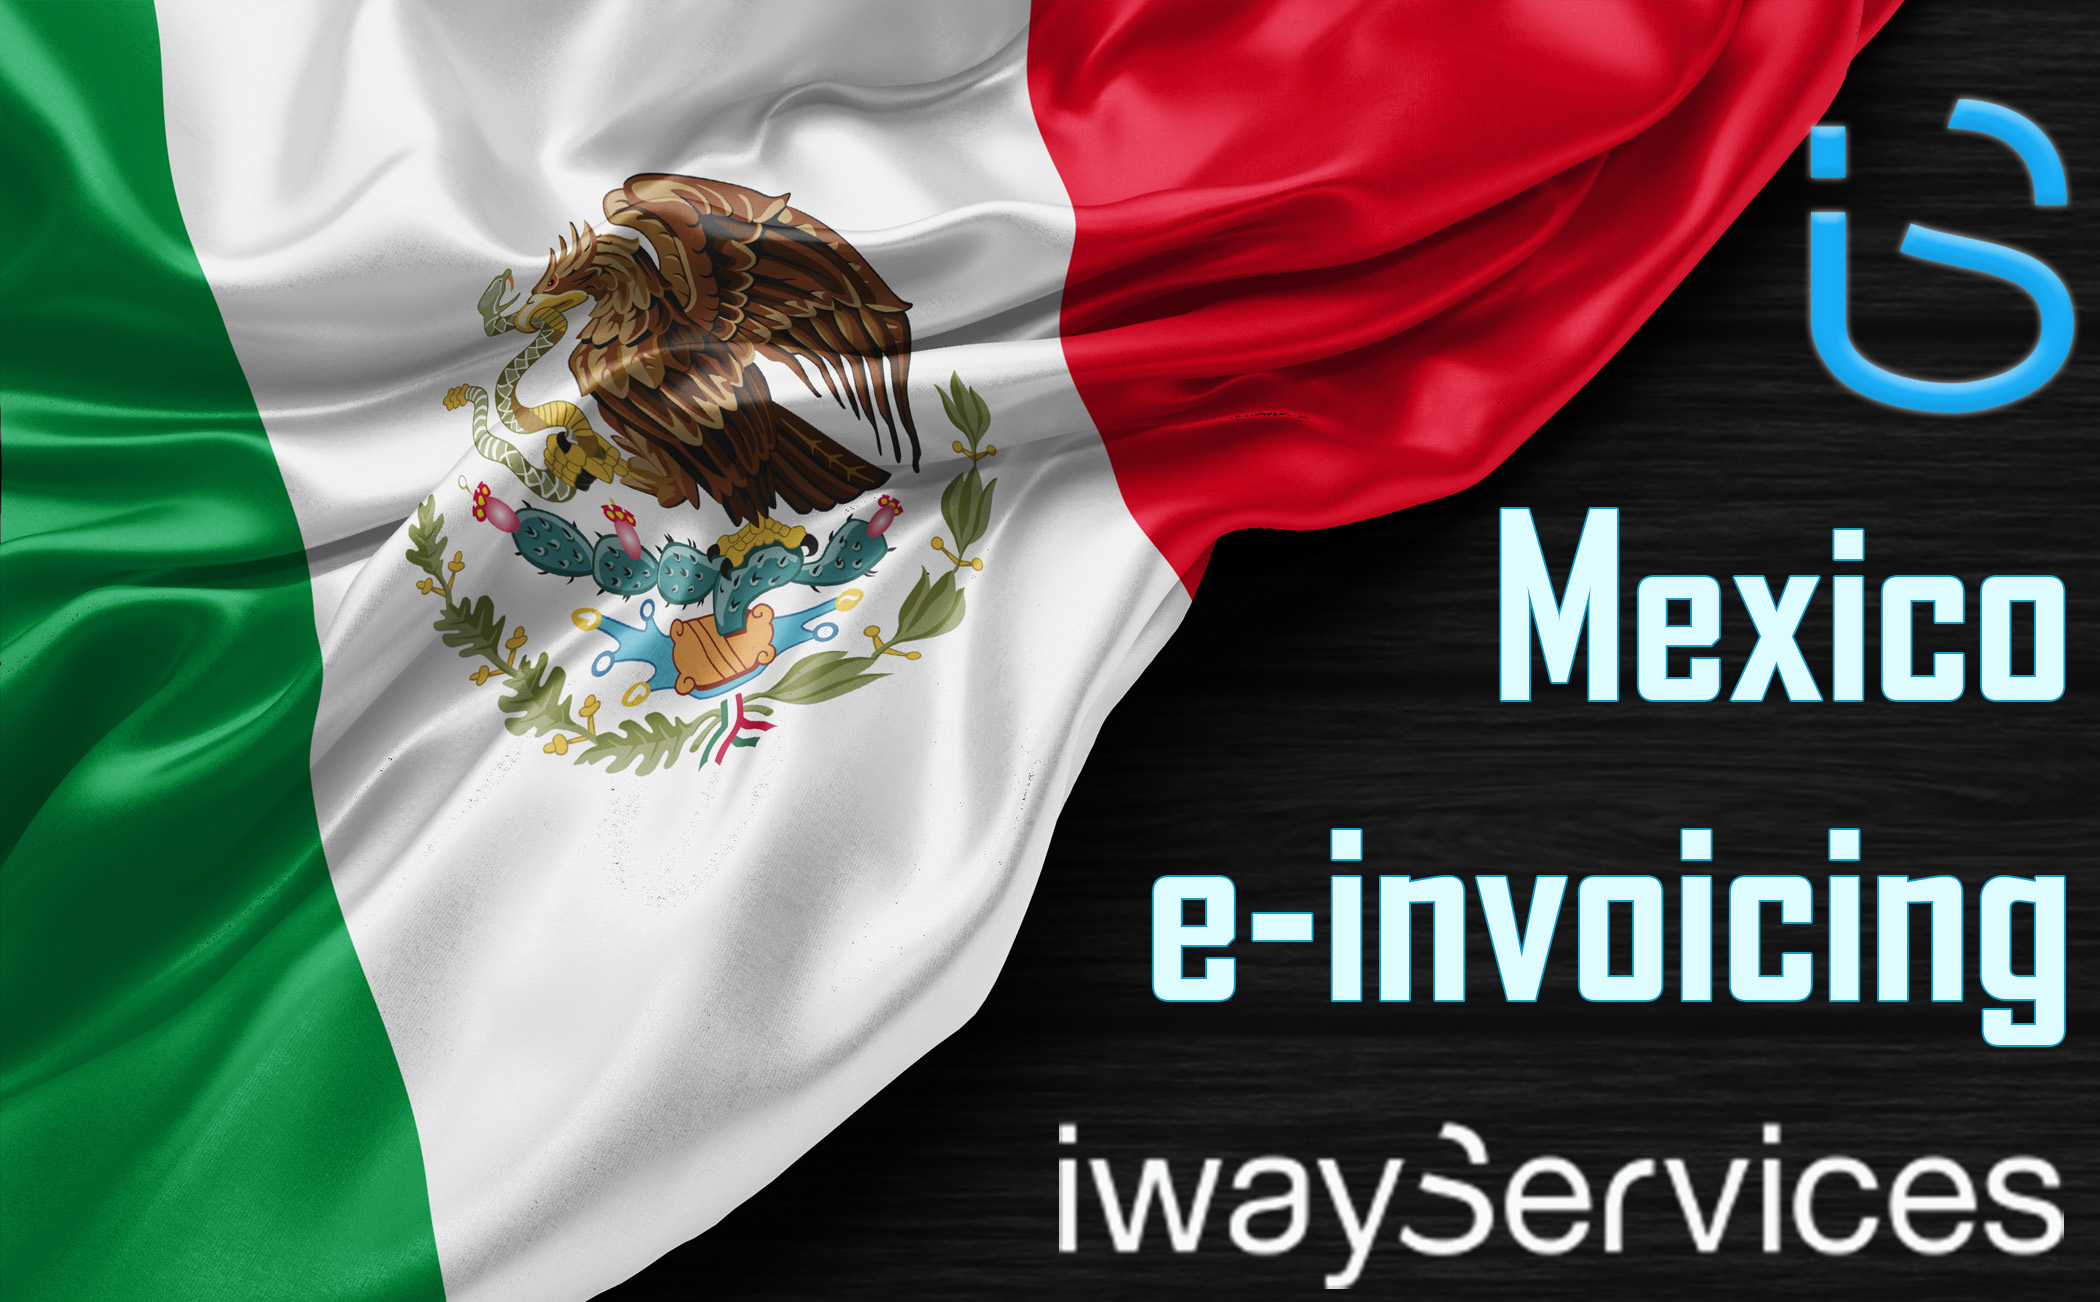 Mexican electronic invoicing